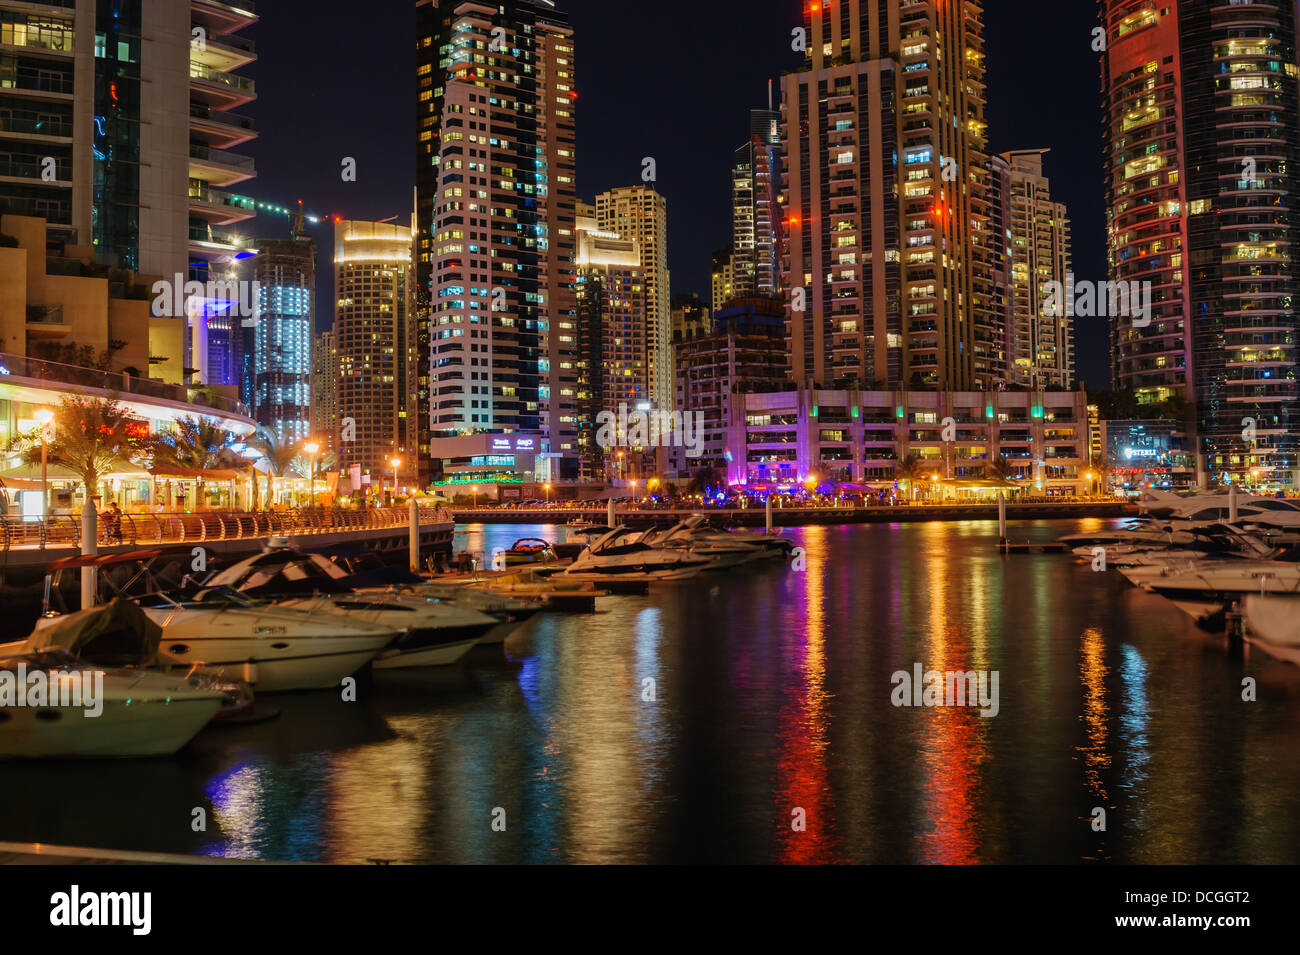 Dubai Marina at night, on November 16, 2012, Dubai, UAE. In the city of artificial channel length of 3 kilometers along the Pers Stock Photo